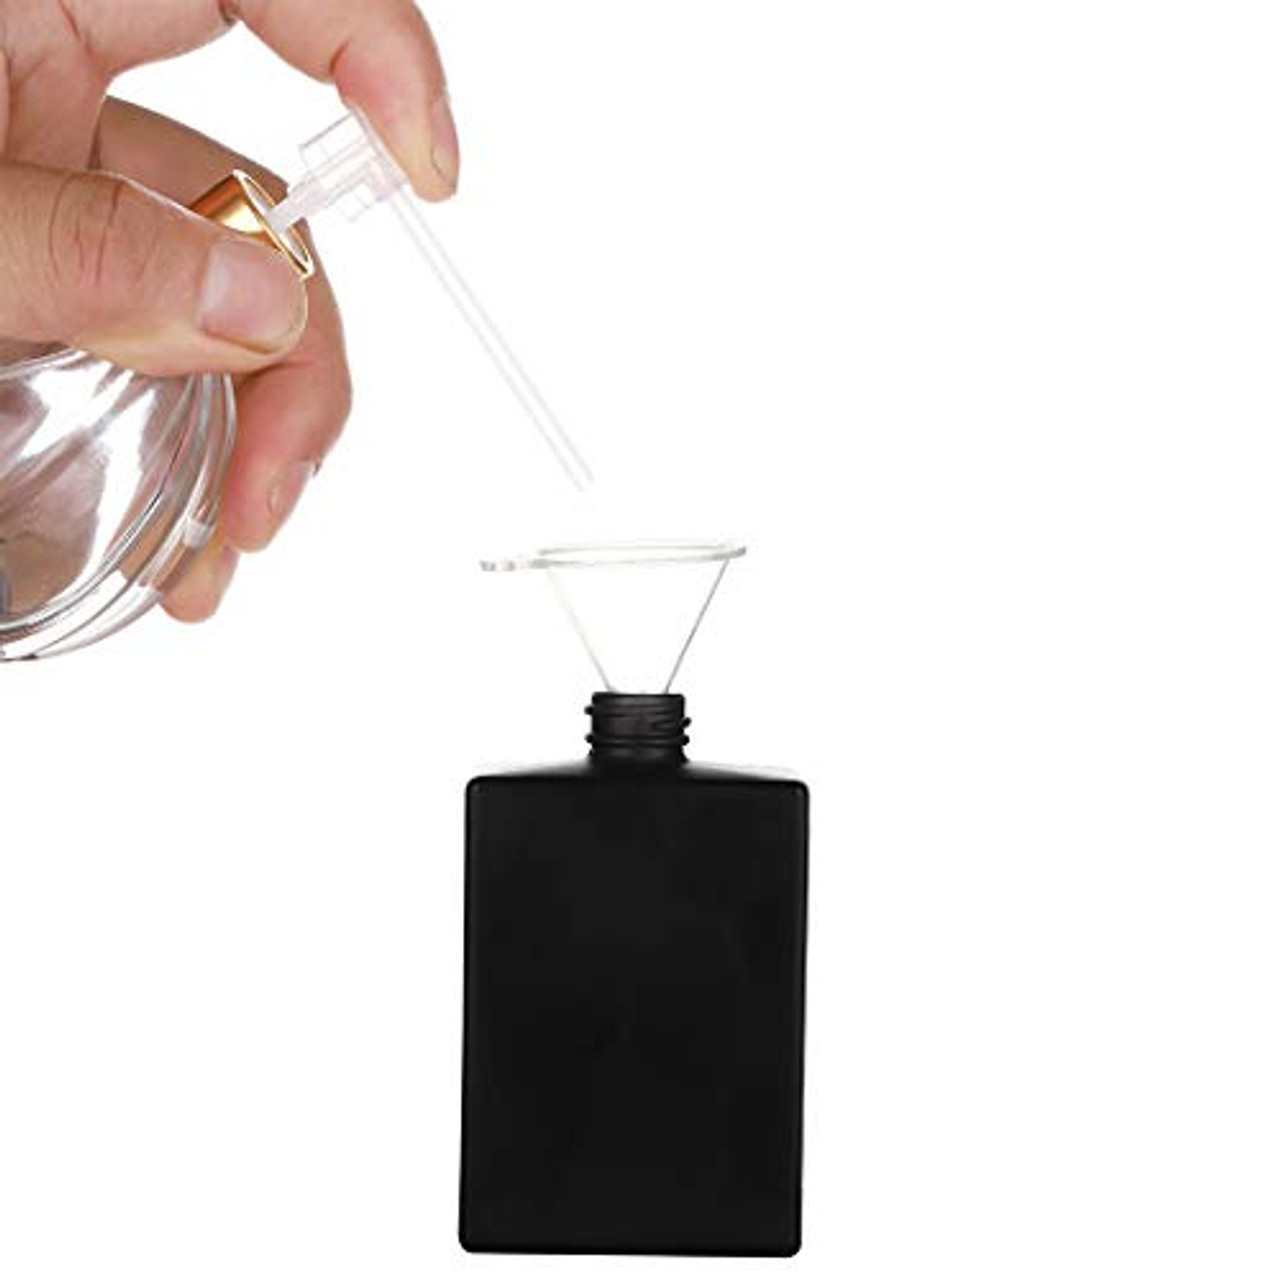 SYBiTeng 6 Pack 30ml / 1 oz. Black Refillable Perfume Bottle, Portable  Square Empty Glass Perfume At…See more SYBiTeng 6 Pack 30ml / 1 oz. Black